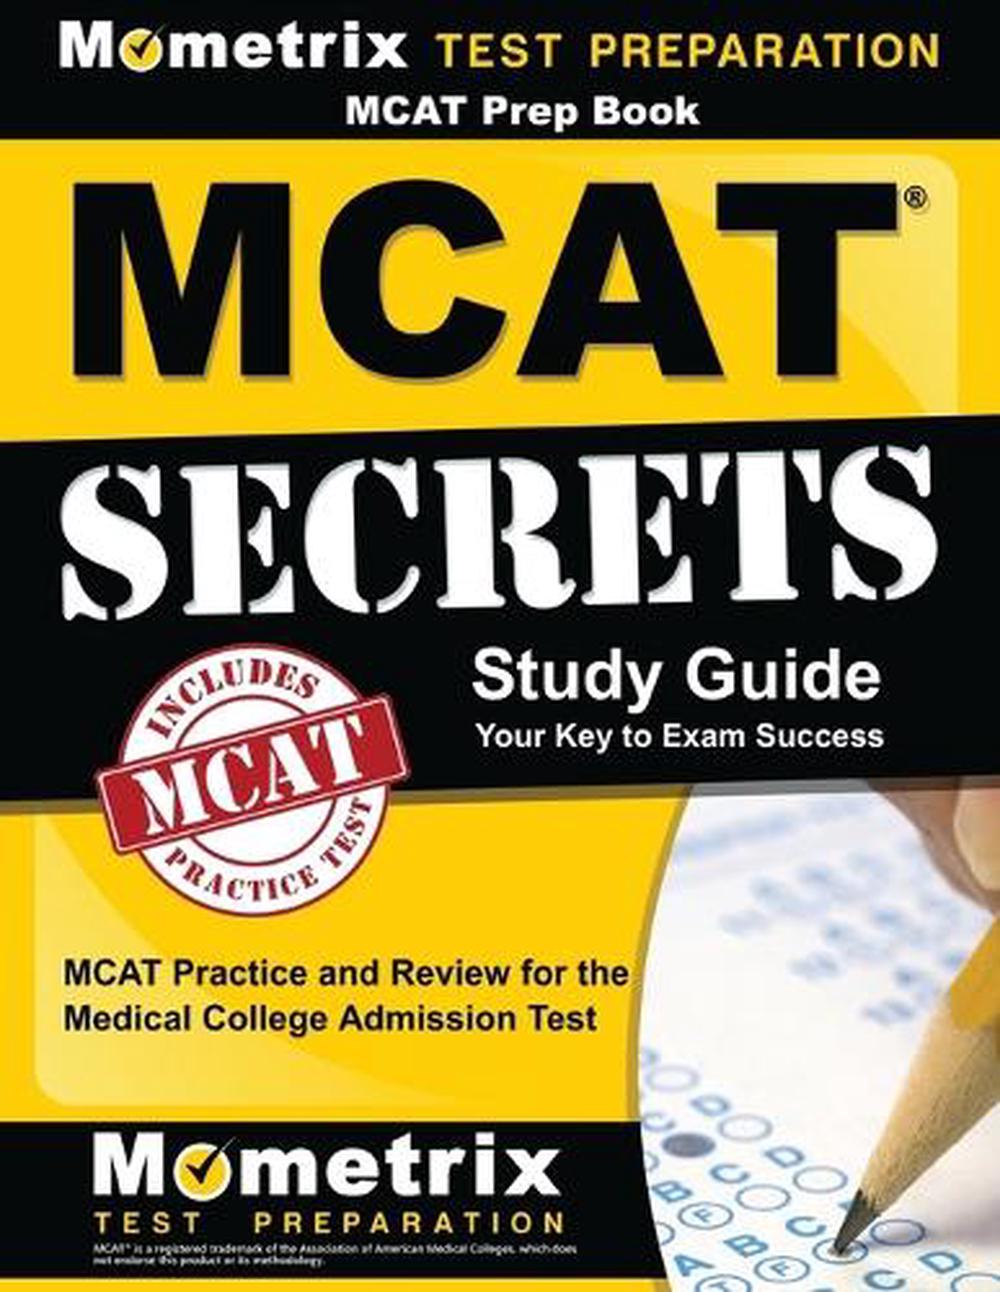 mcat-prep-book-mcat-secrets-study-guide-mcat-practice-and-review-for